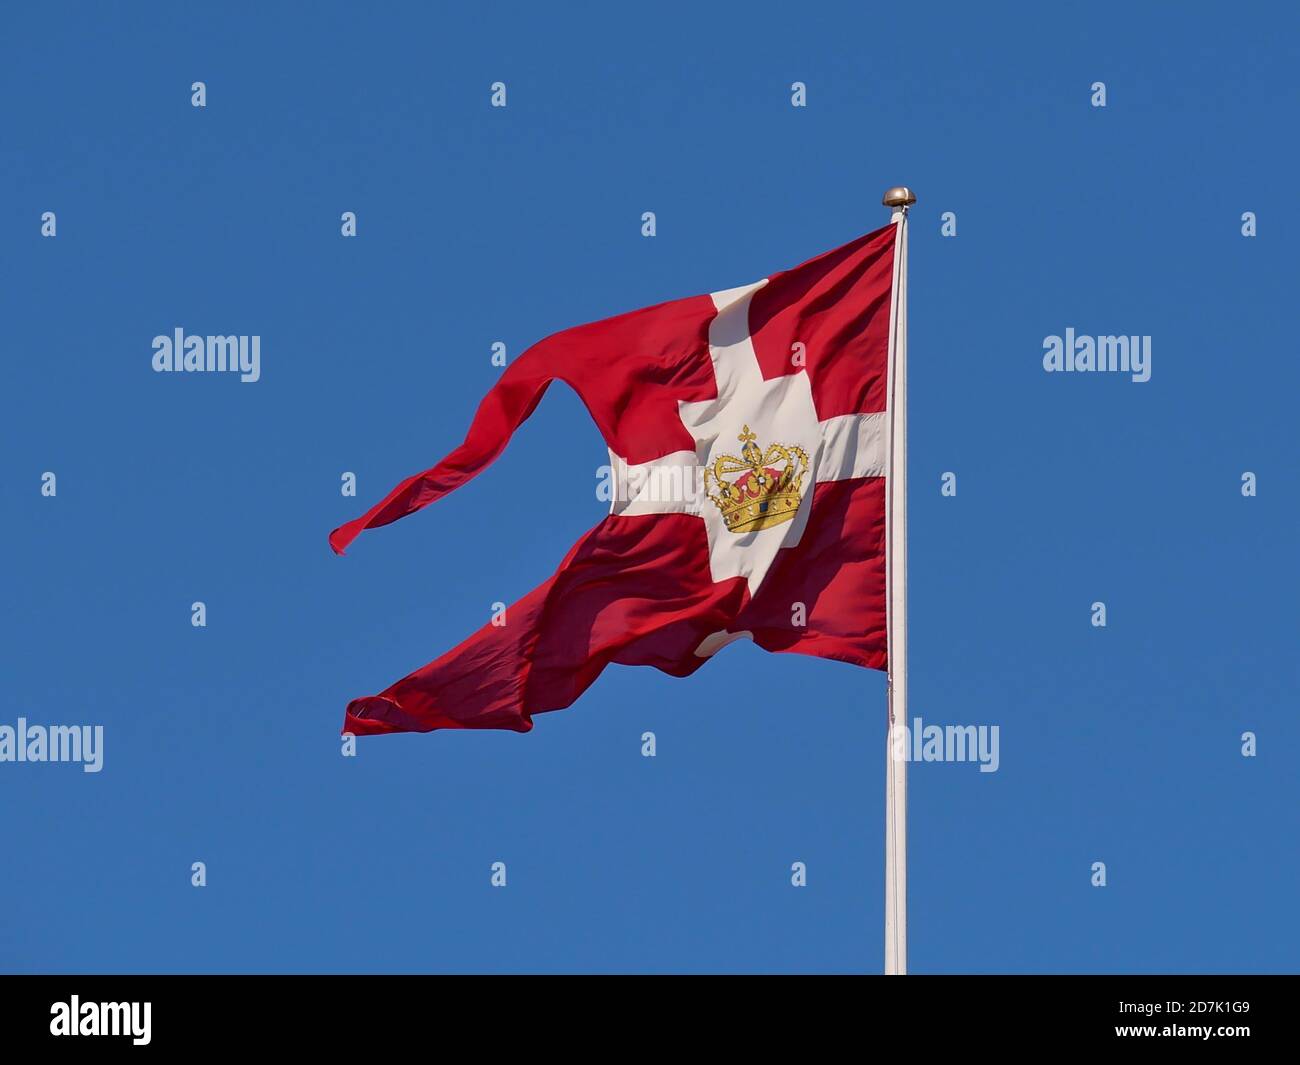 The royal standard flag (red ground with white cross and a golden crown in center) of the Danish royal family flying in the wind above Amalienborg . Stock Photo